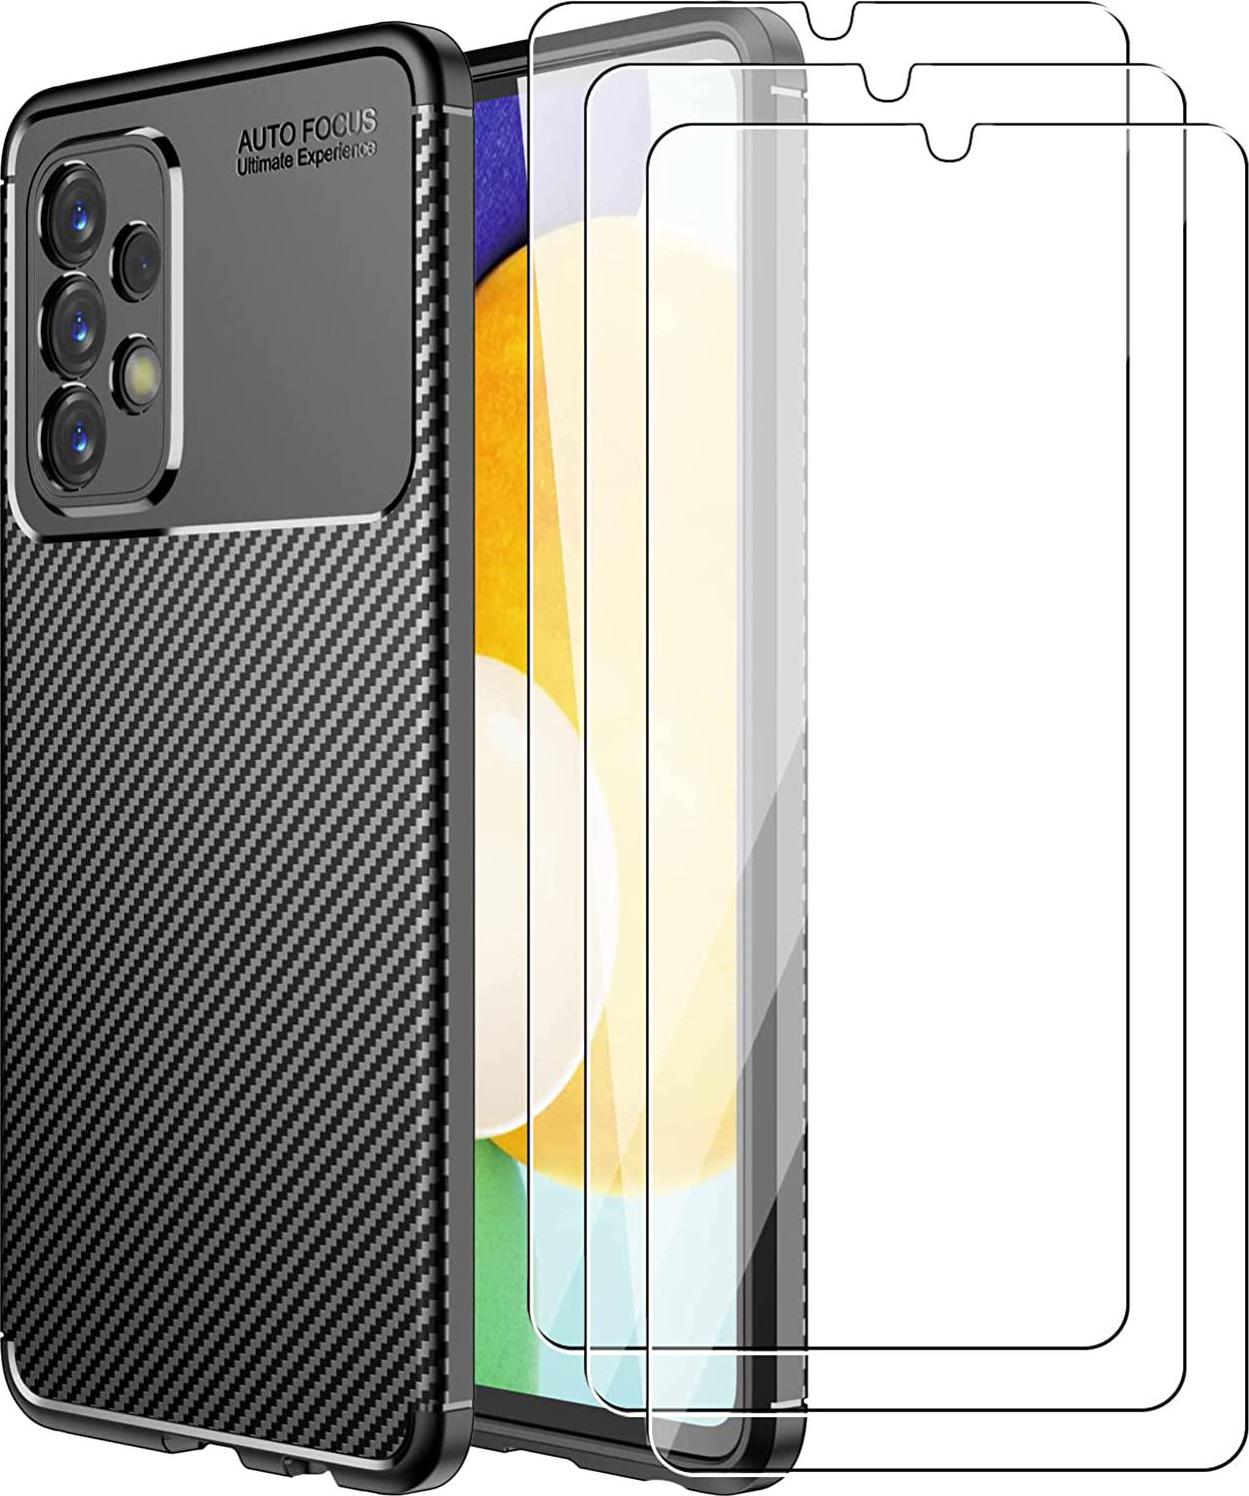 Electro-weideworld, Electro-weideworld Case for SamsungÂ GalaxyÂ A23 + [3 Pack] Screen Protector, Shock-Absorption Flexible Silicone Protective Cover Phone Case for SamsungÂ GalaxyÂ A23, Black